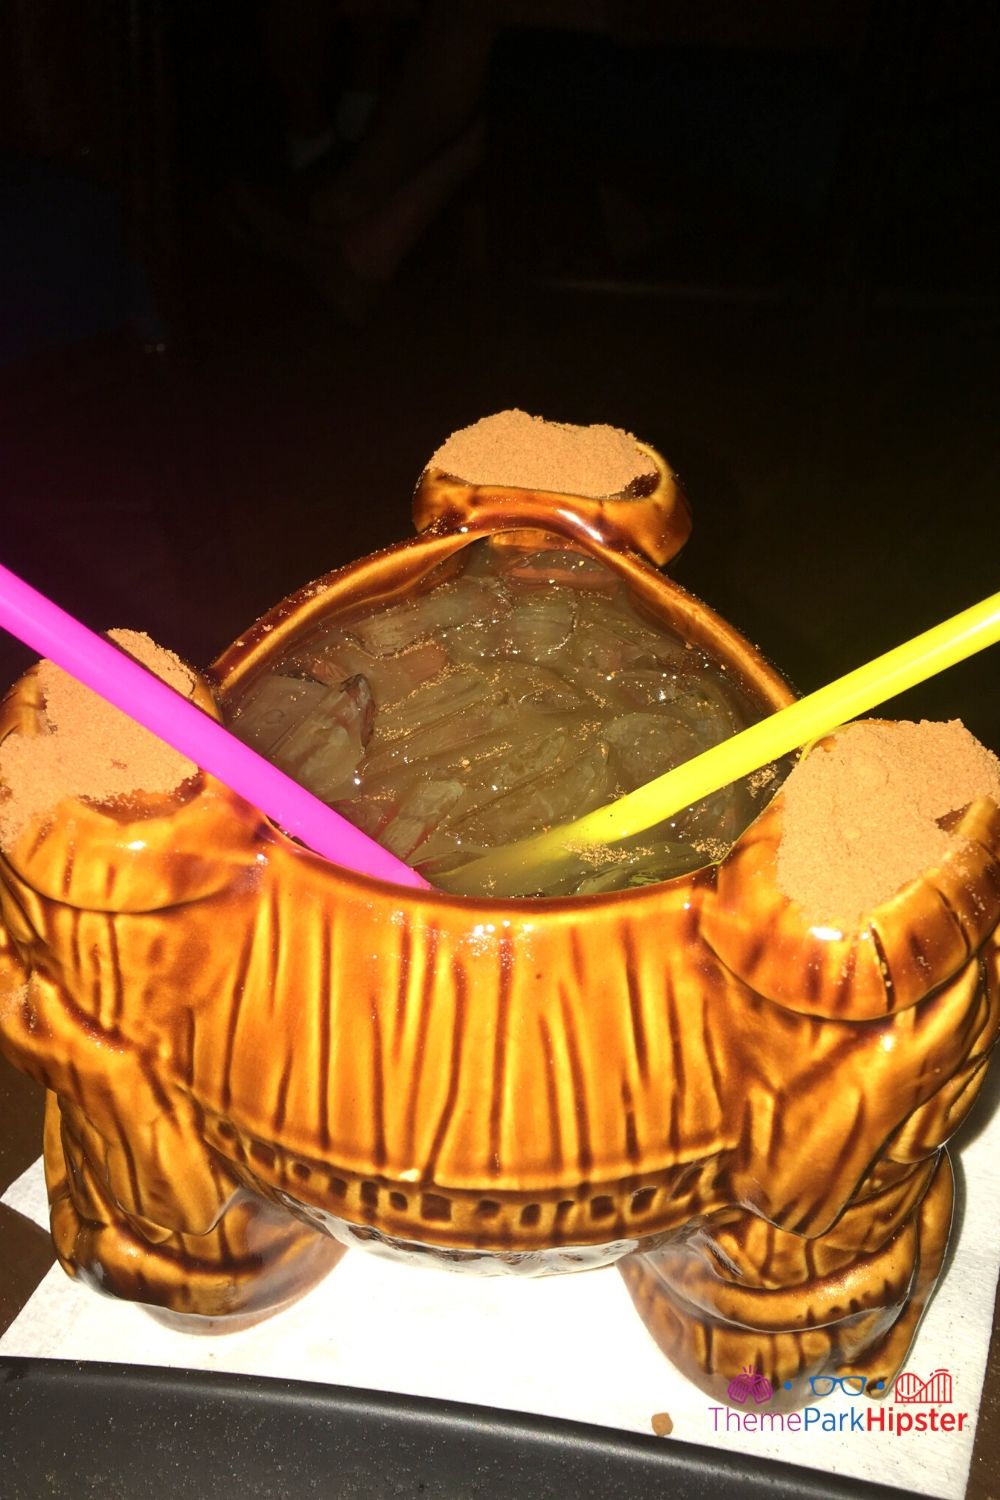 Trader Sams Grog Grotto Uh Oa Plantation Original Dark Rum Bacardi Superior Rum Orange Passion Fruit Guava, Pineapple Grapefruit Juices Falernum, Cinnamon Lime Juice. Keep reading to learn about the best lounges and bars at Disney World.